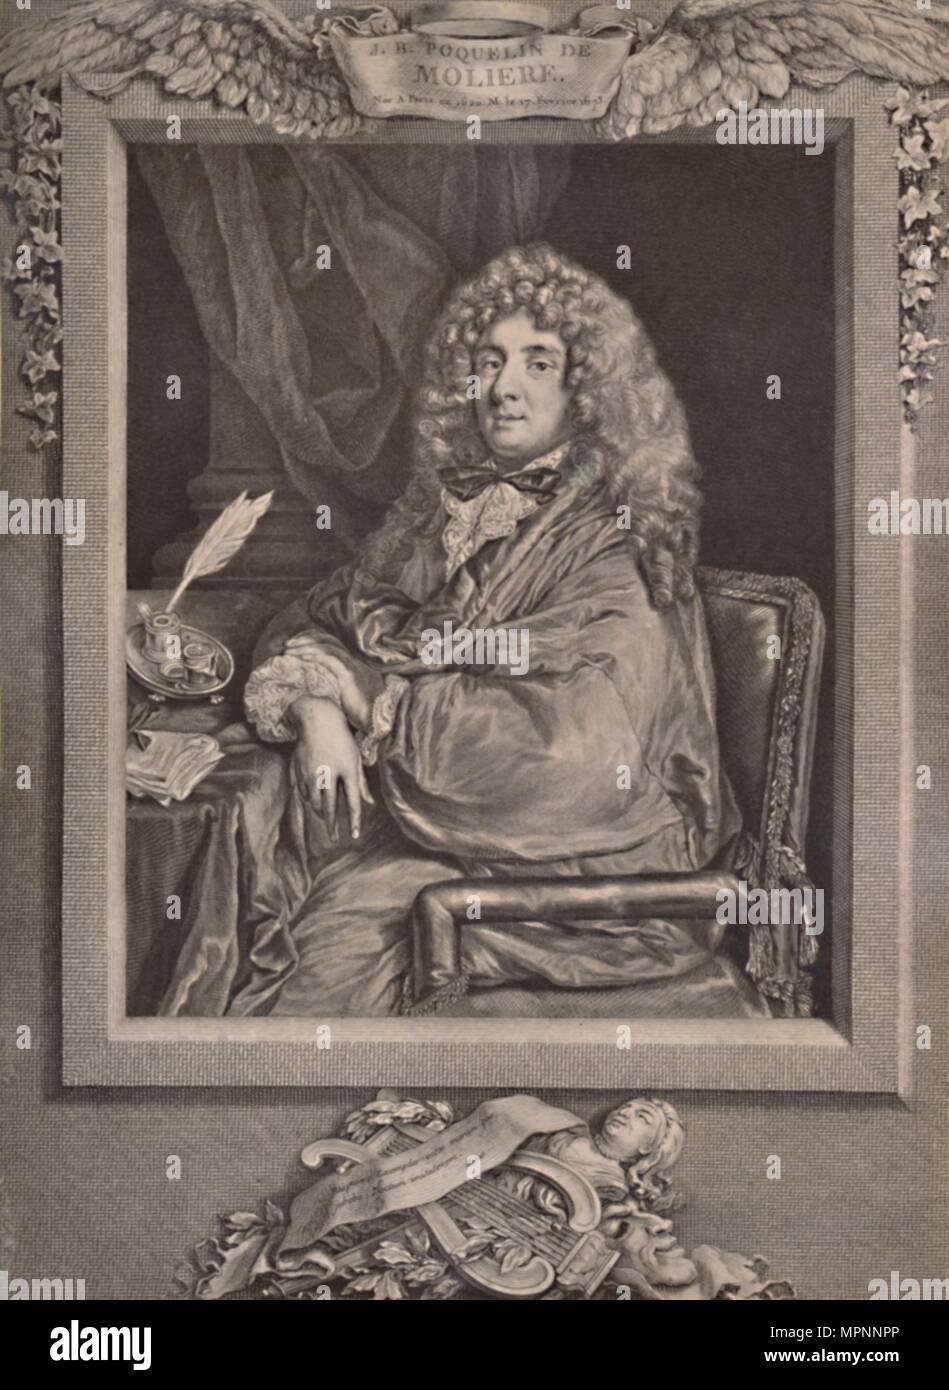 Moliere, French playwright and actor, 18th century (1894). Artist: Jacques Firmin Beauvarlet. Stock Photo